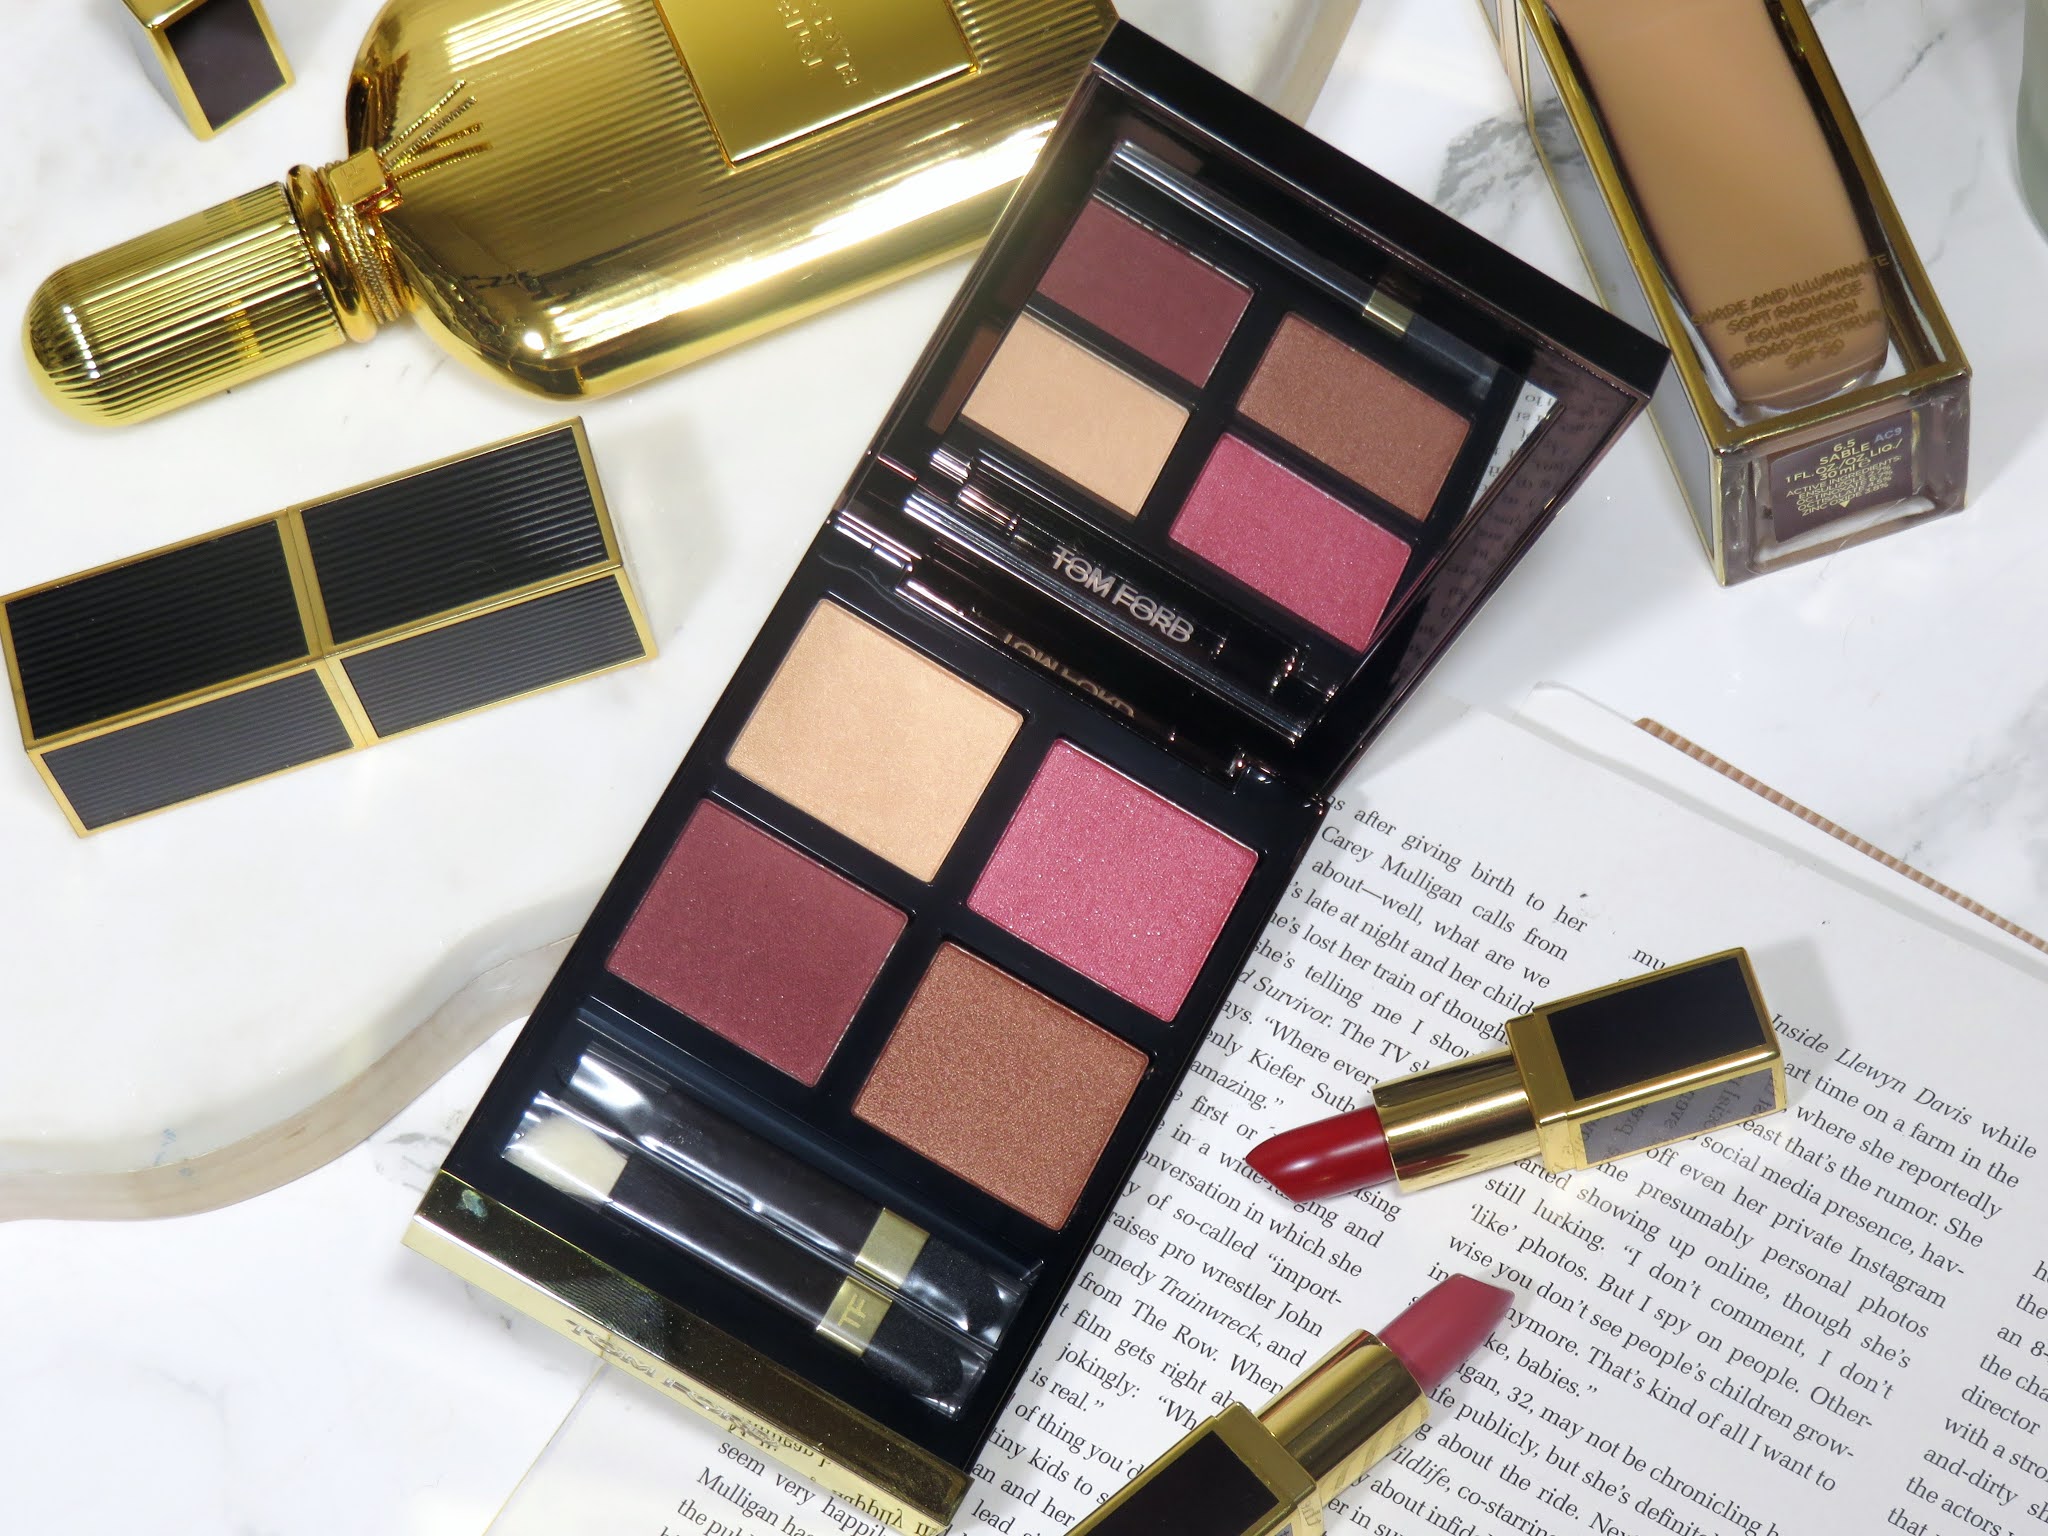 Tom Ford Burnished Amber Eye Color Quad Review and Swatches